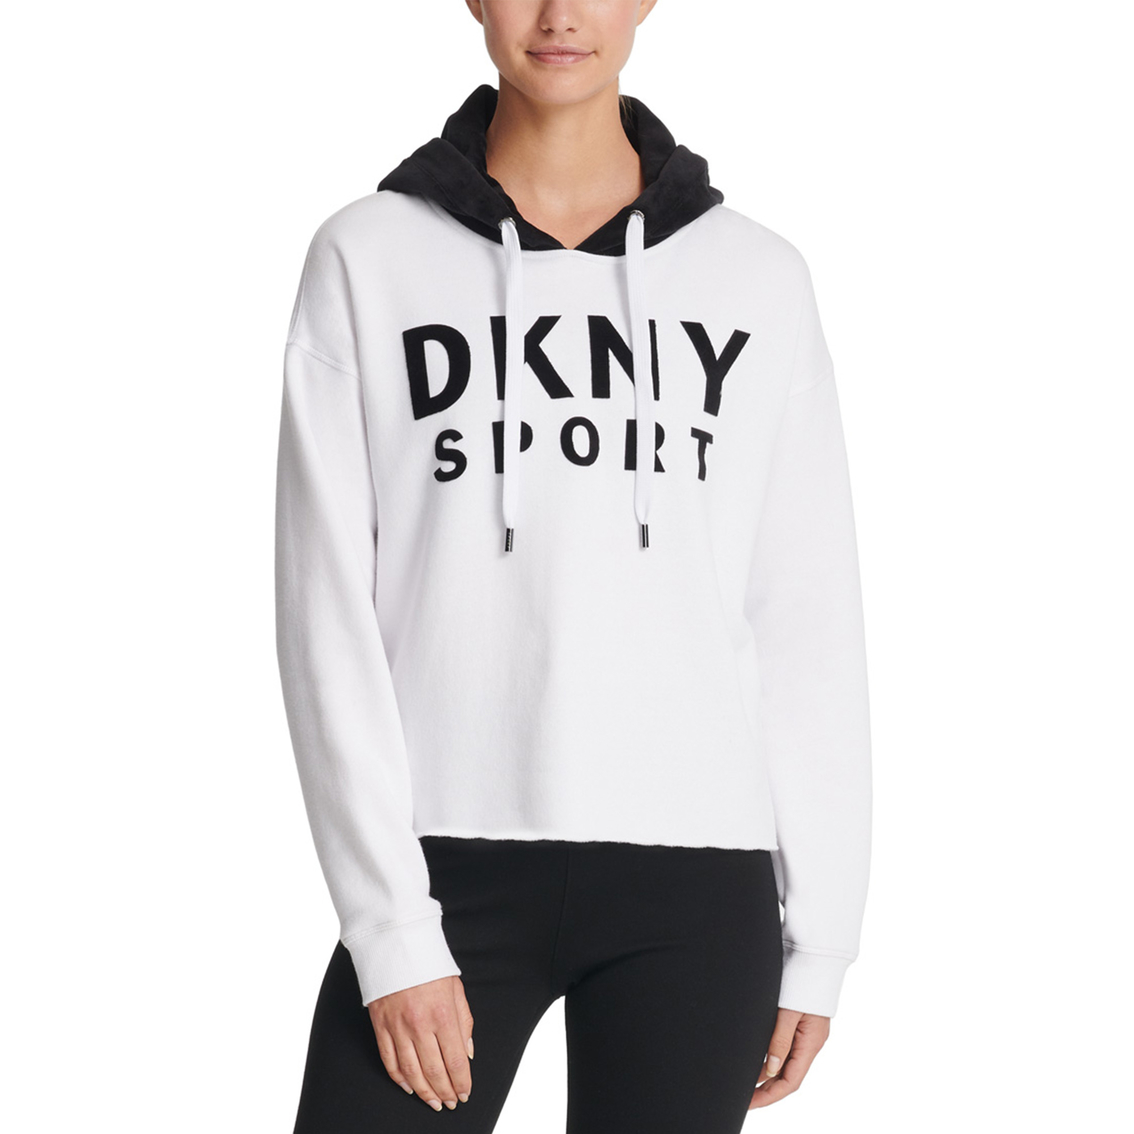 Dkny Sport Velour Logo Hooded Pullover, Hoodies & Sweatshirts, Clothing &  Accessories